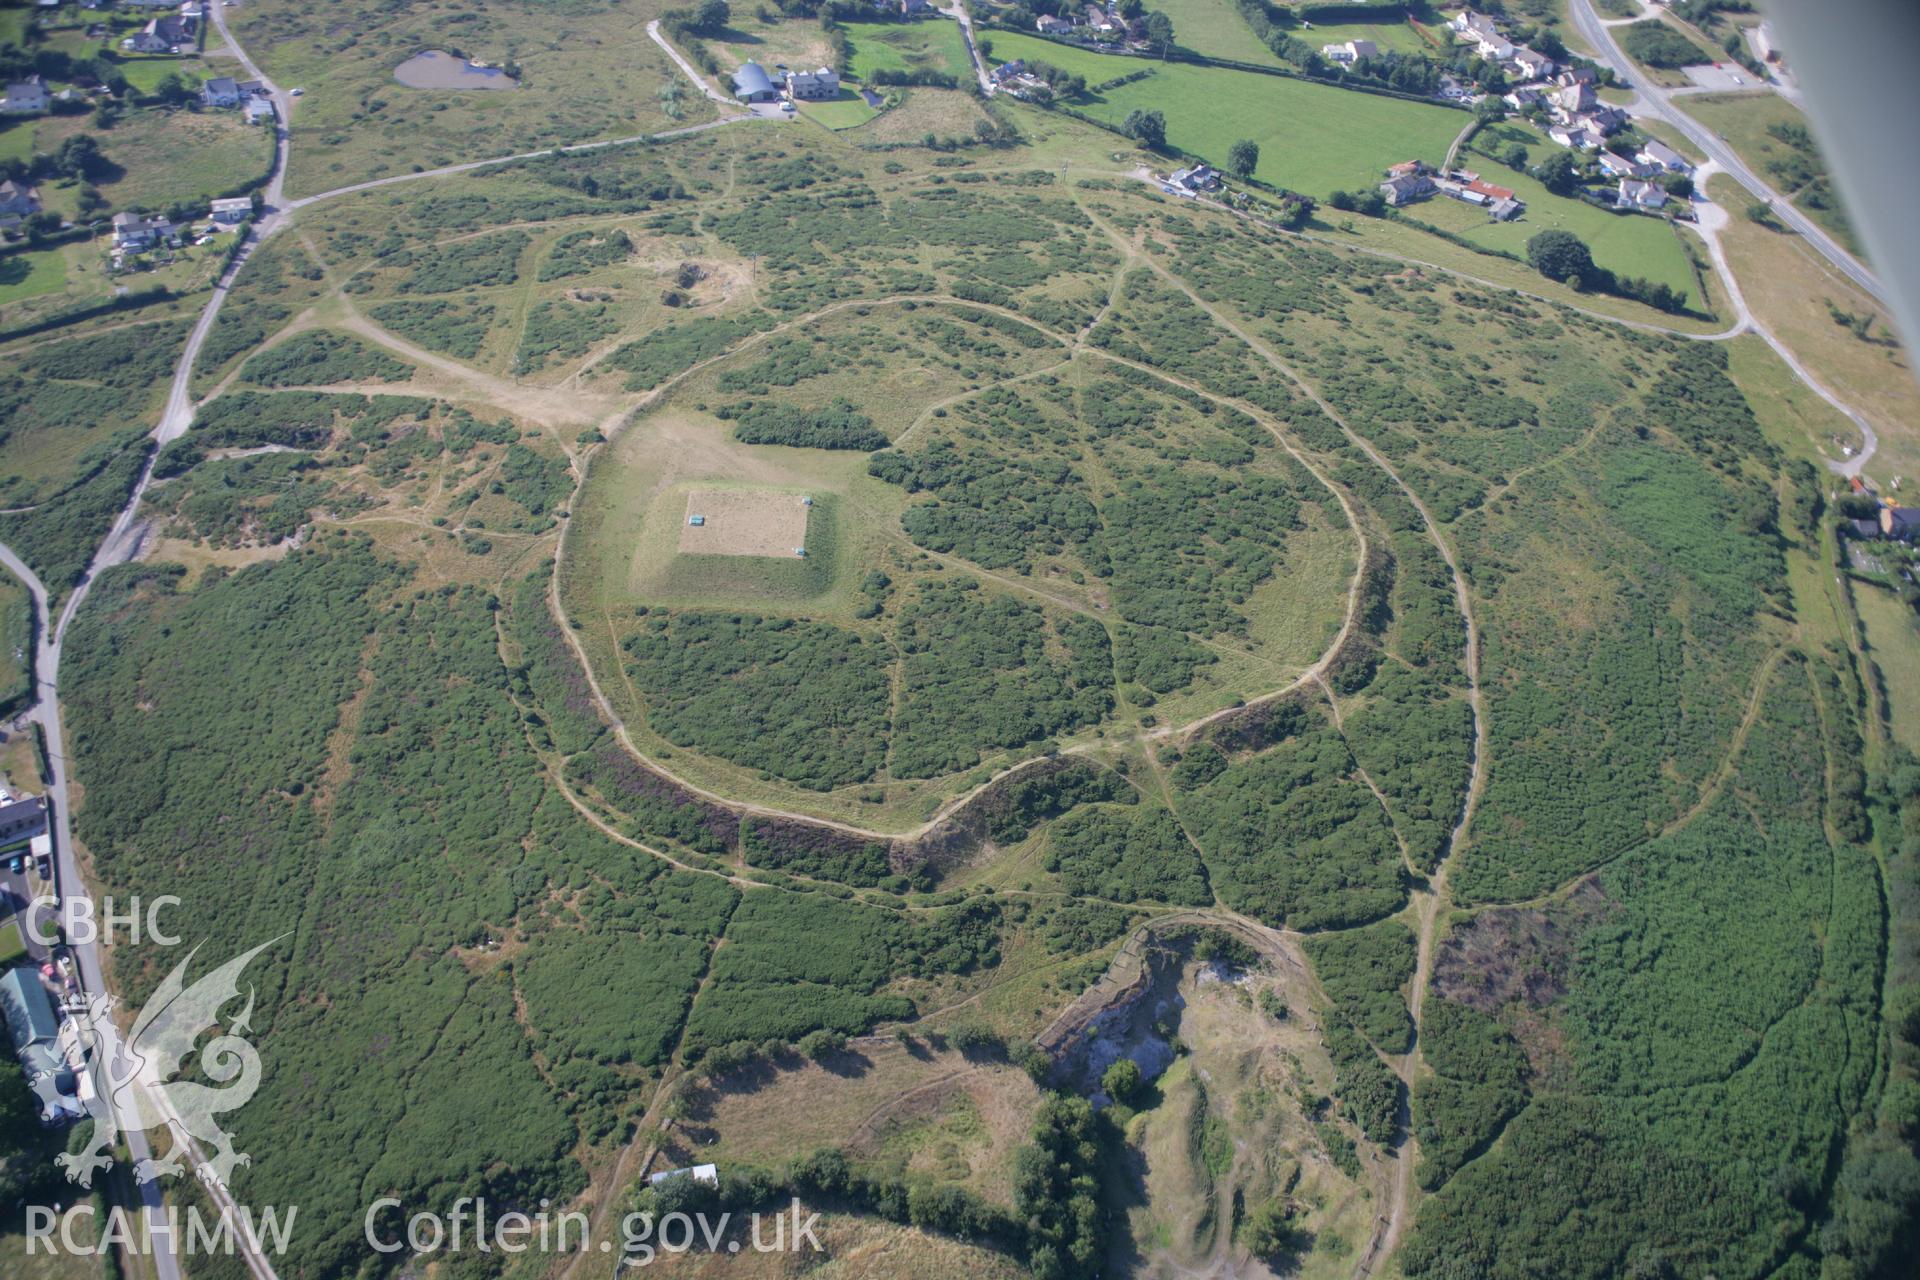 RCAHMW colour oblique aerial photograph of Moel-y-Gaer Camp. Taken on 17 July 2006 by Toby Driver.